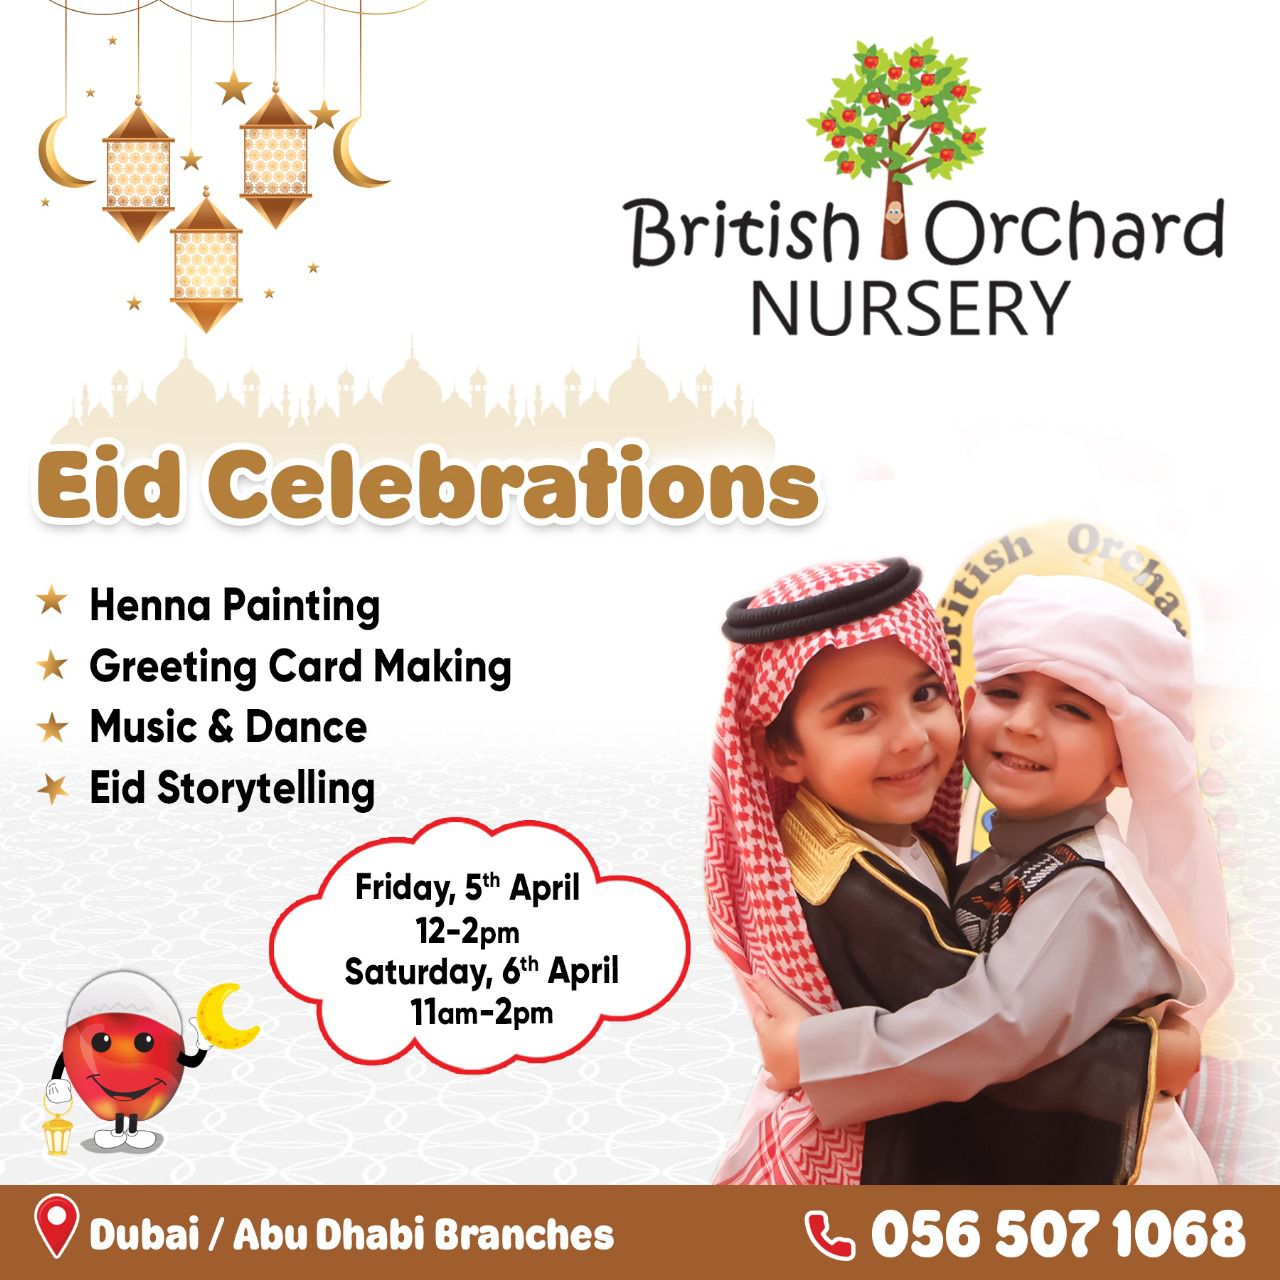 Join us for an enchanting Eid Family Celebration this weekend at British Orchard Nursery! 🎉🌙